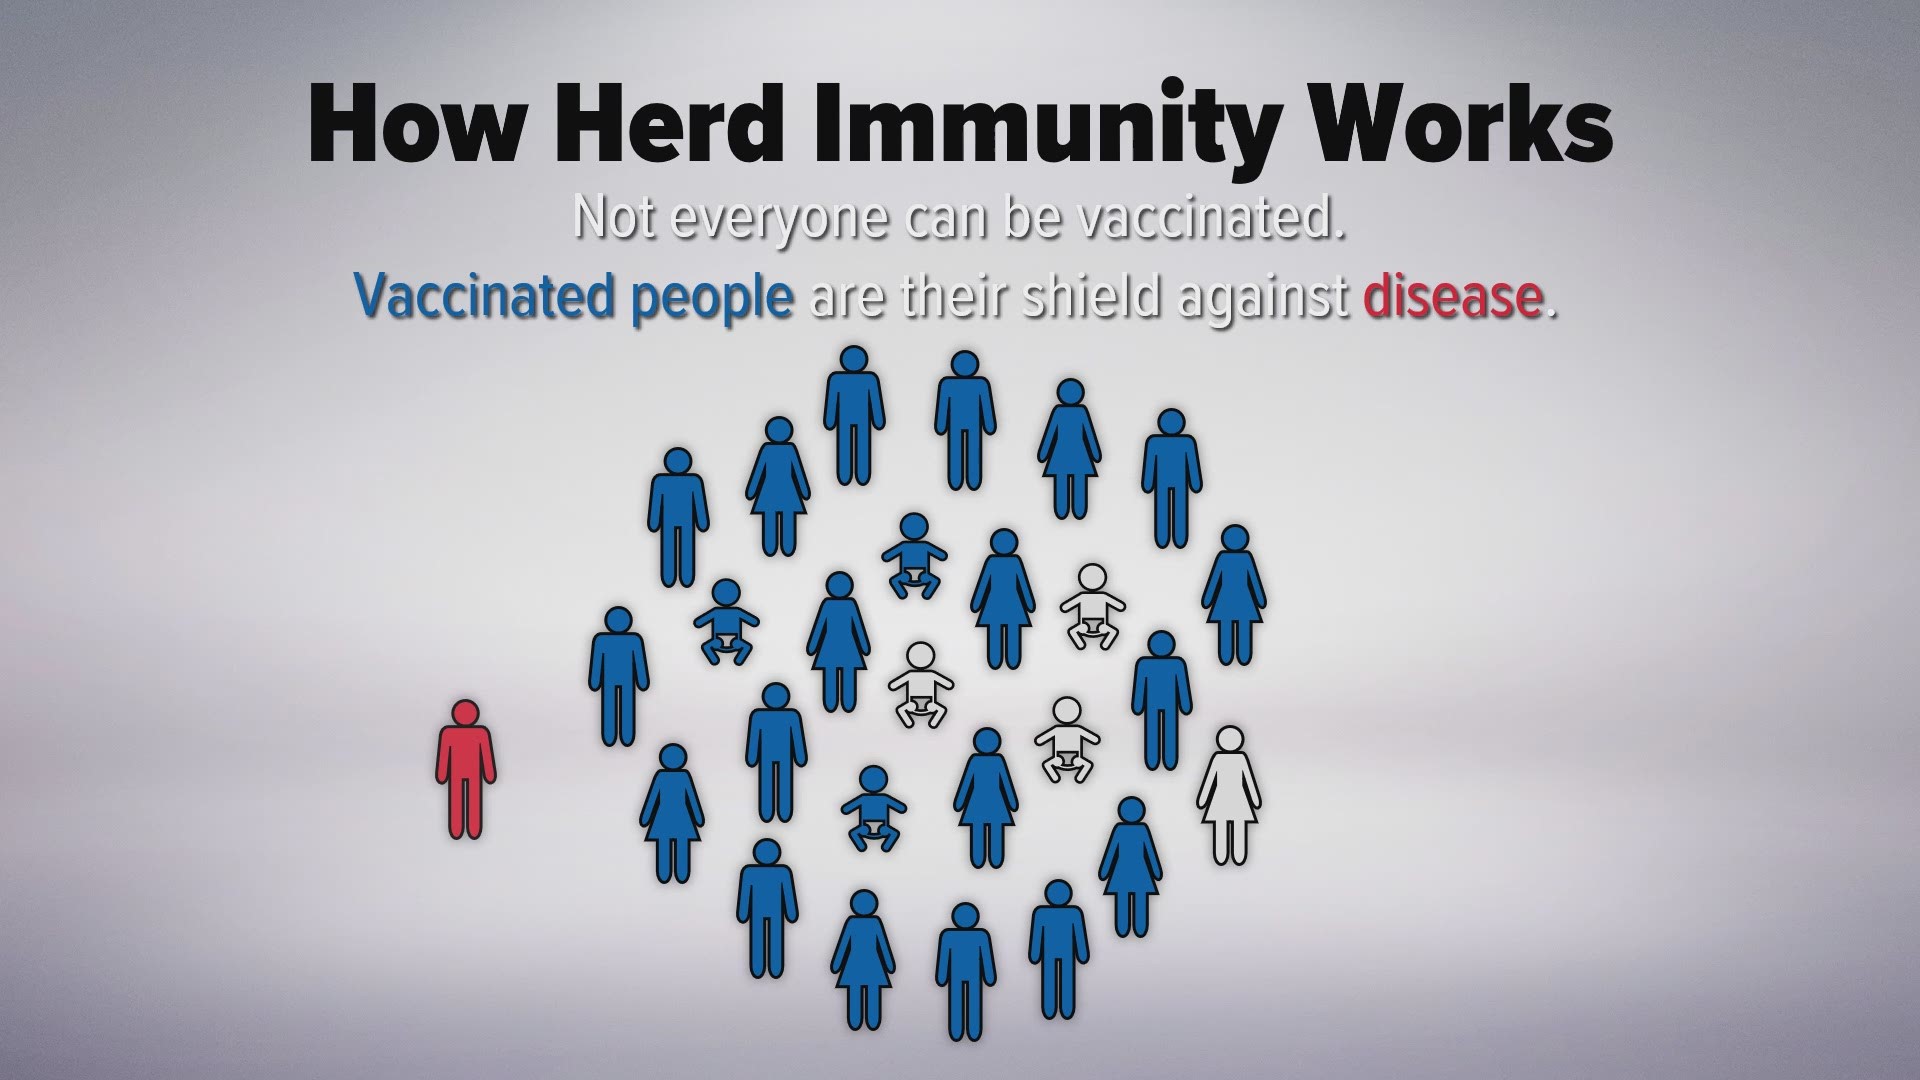 Not everyone can be vaccinated. Vaccinated people are their shield against disease.